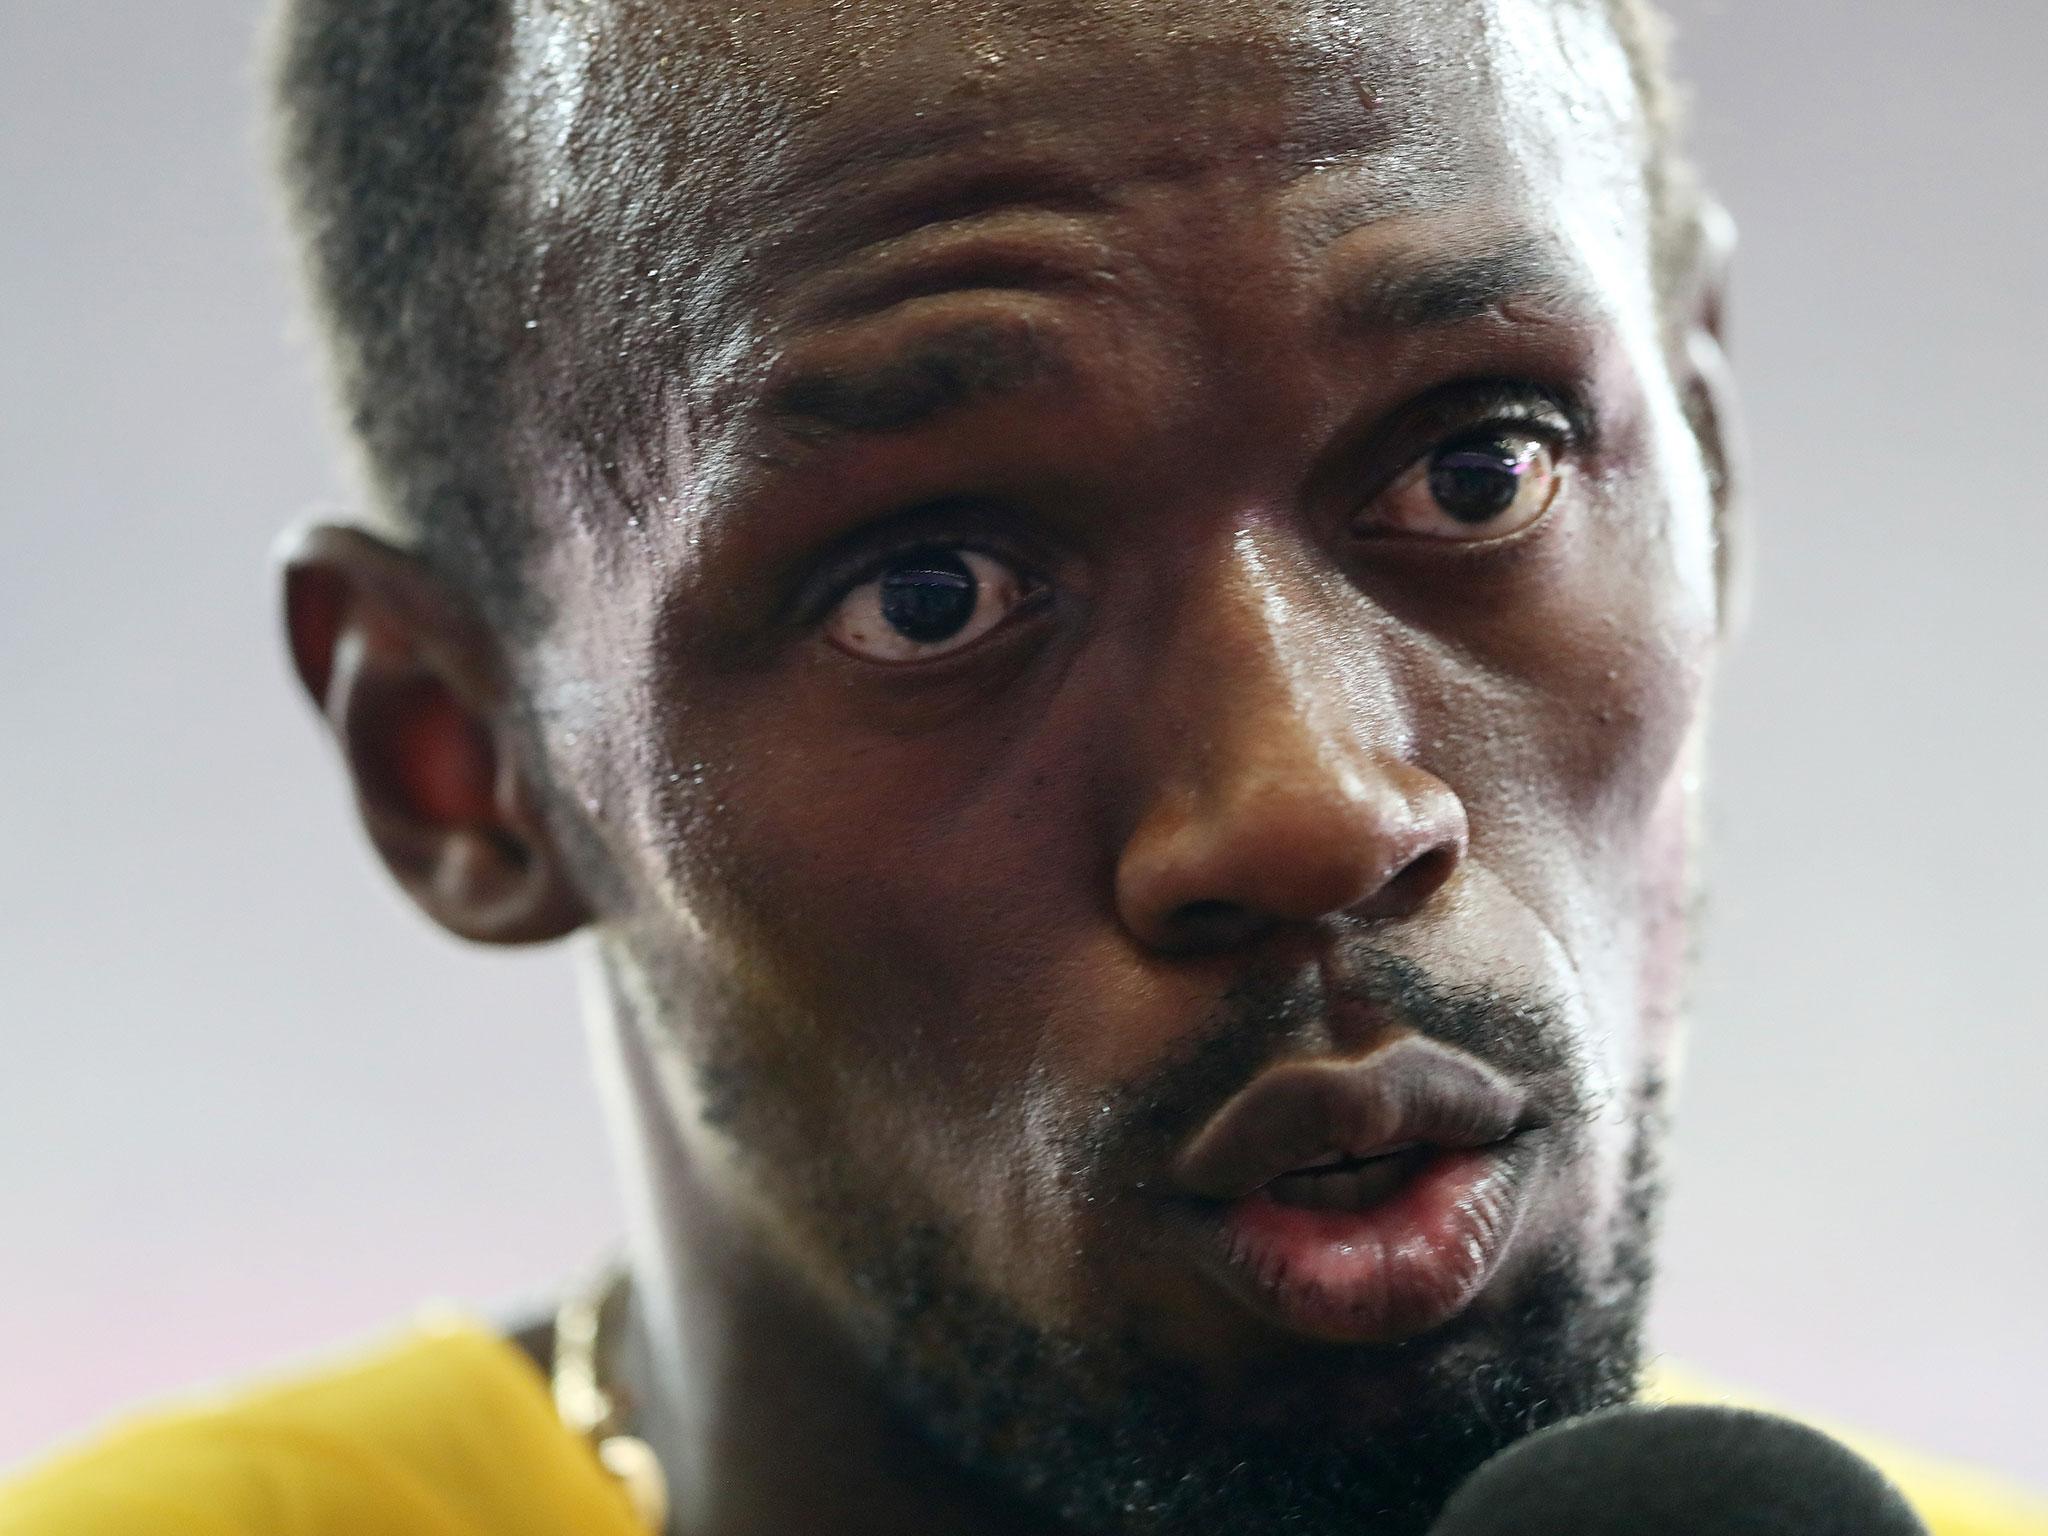 Usain Bolt described his first-round 100m heat as 'very bad'